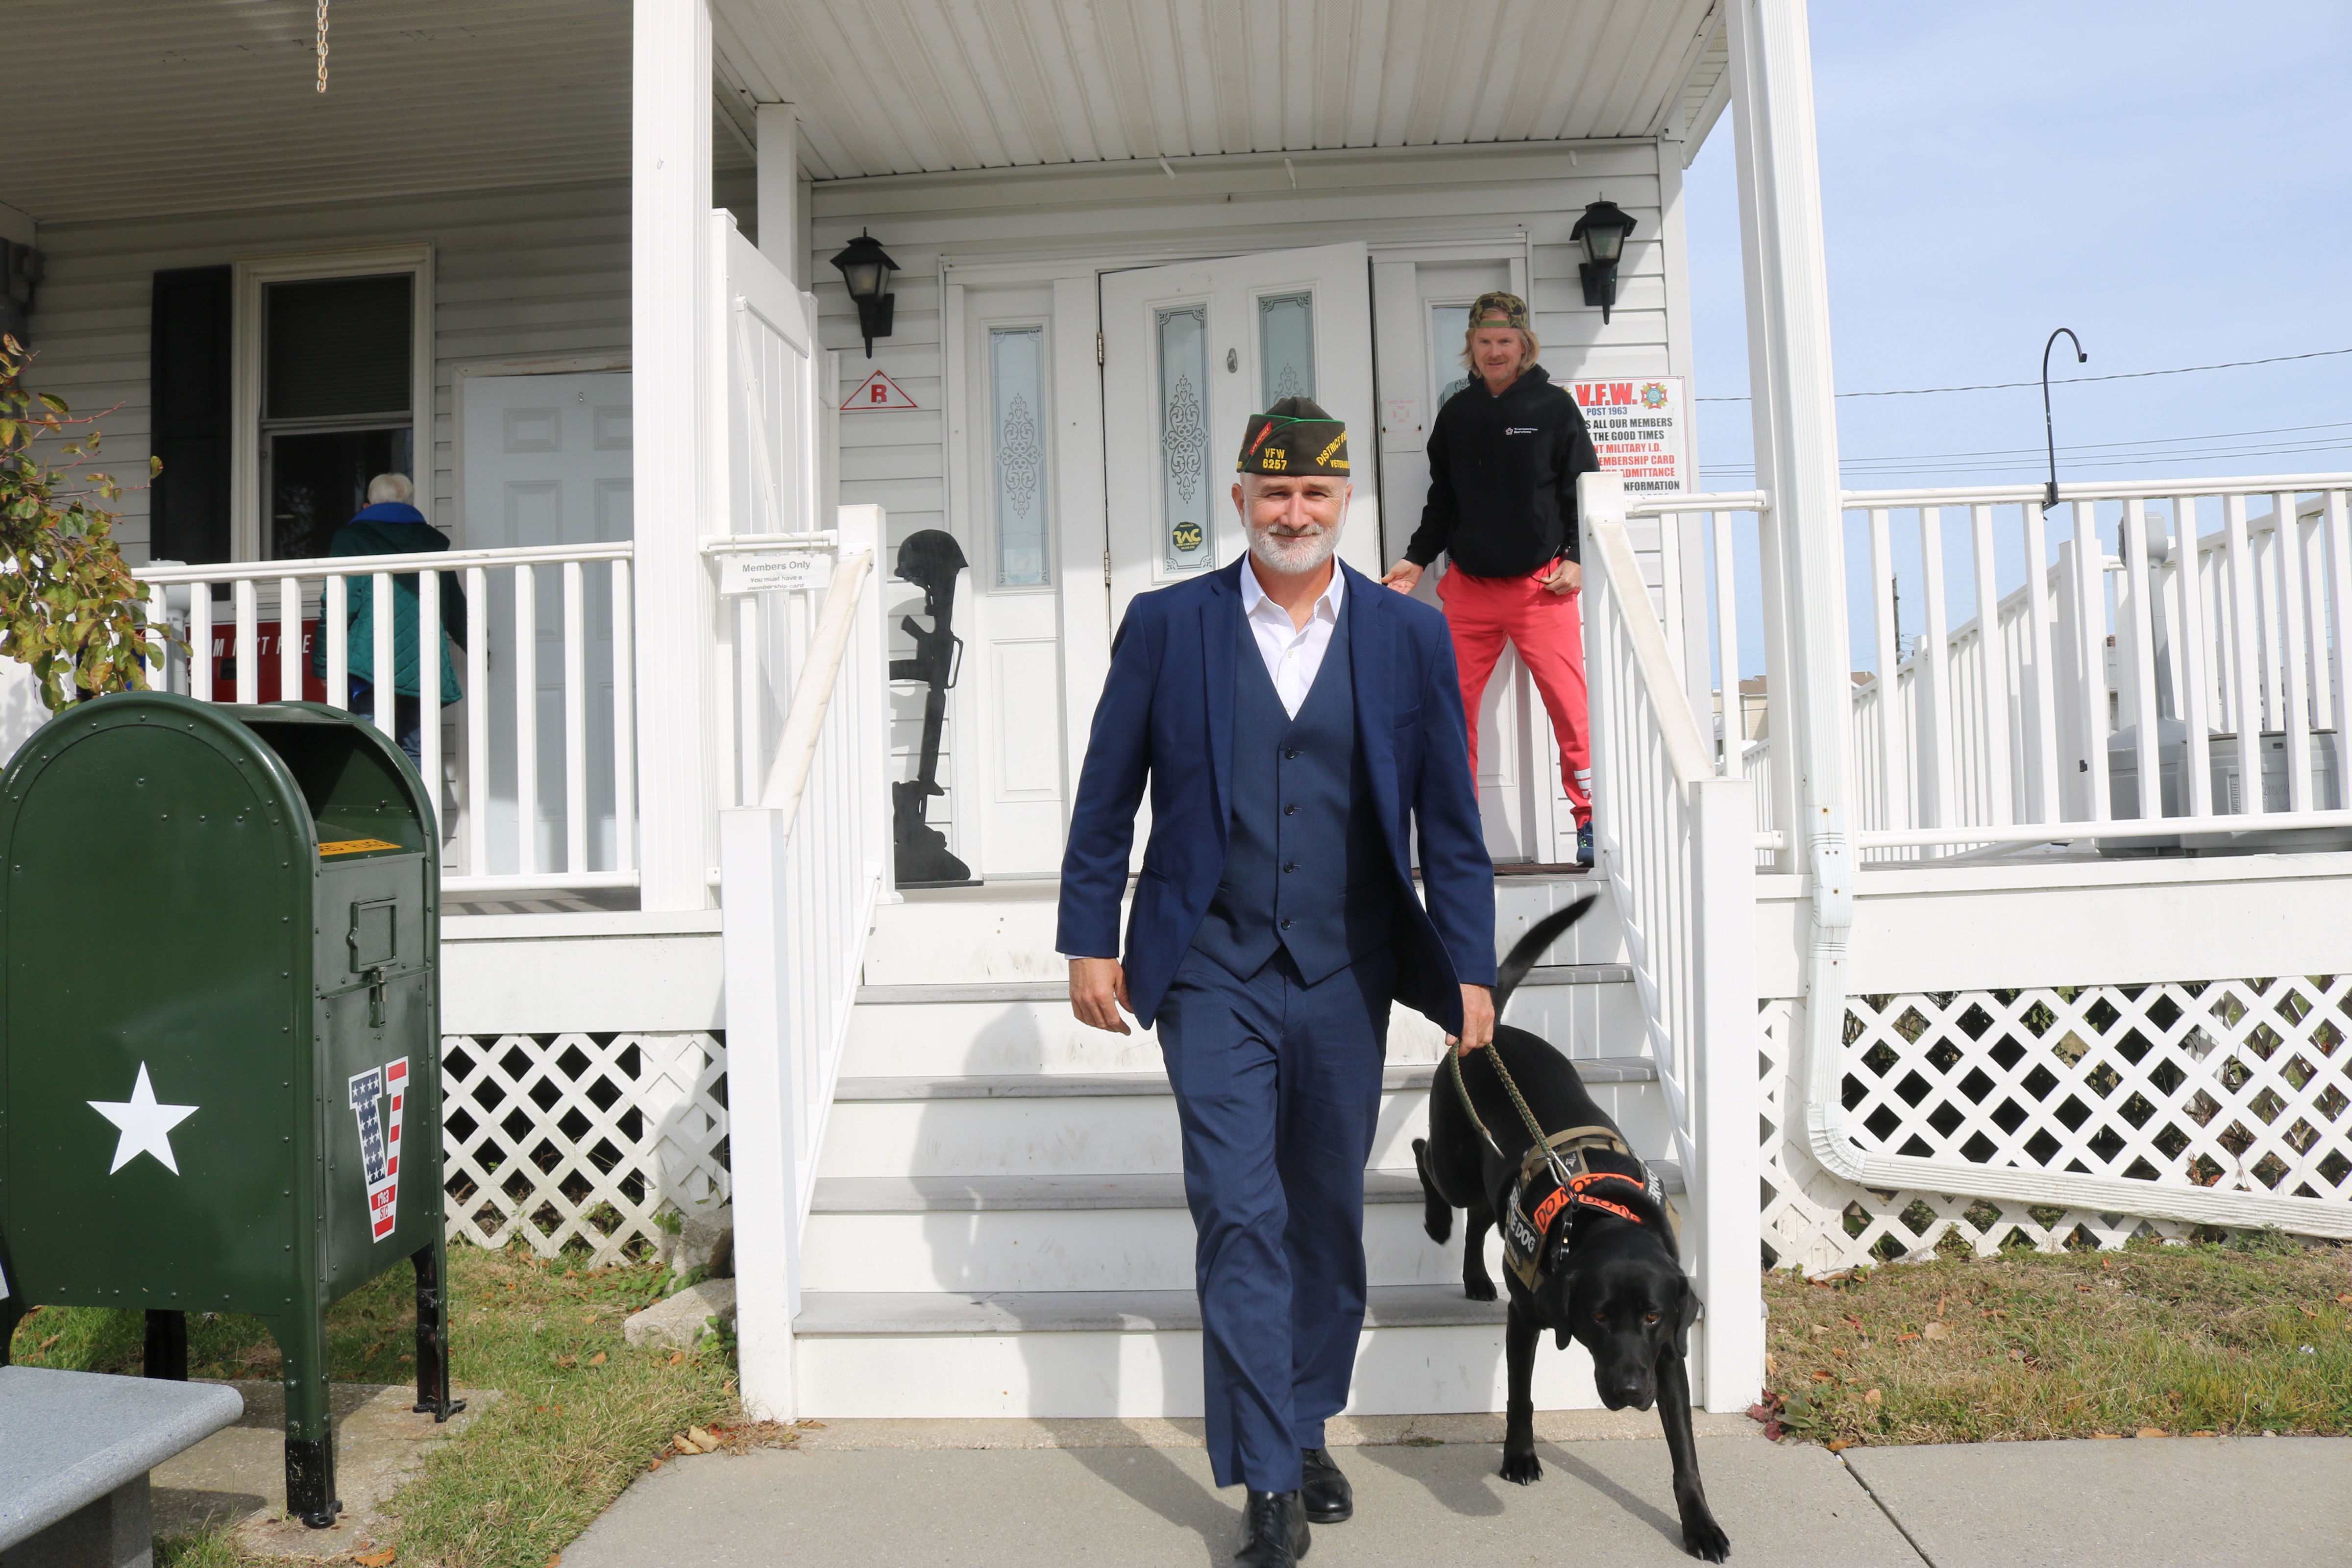 Rights of Service Animals and Their Owners | Sea Isle News